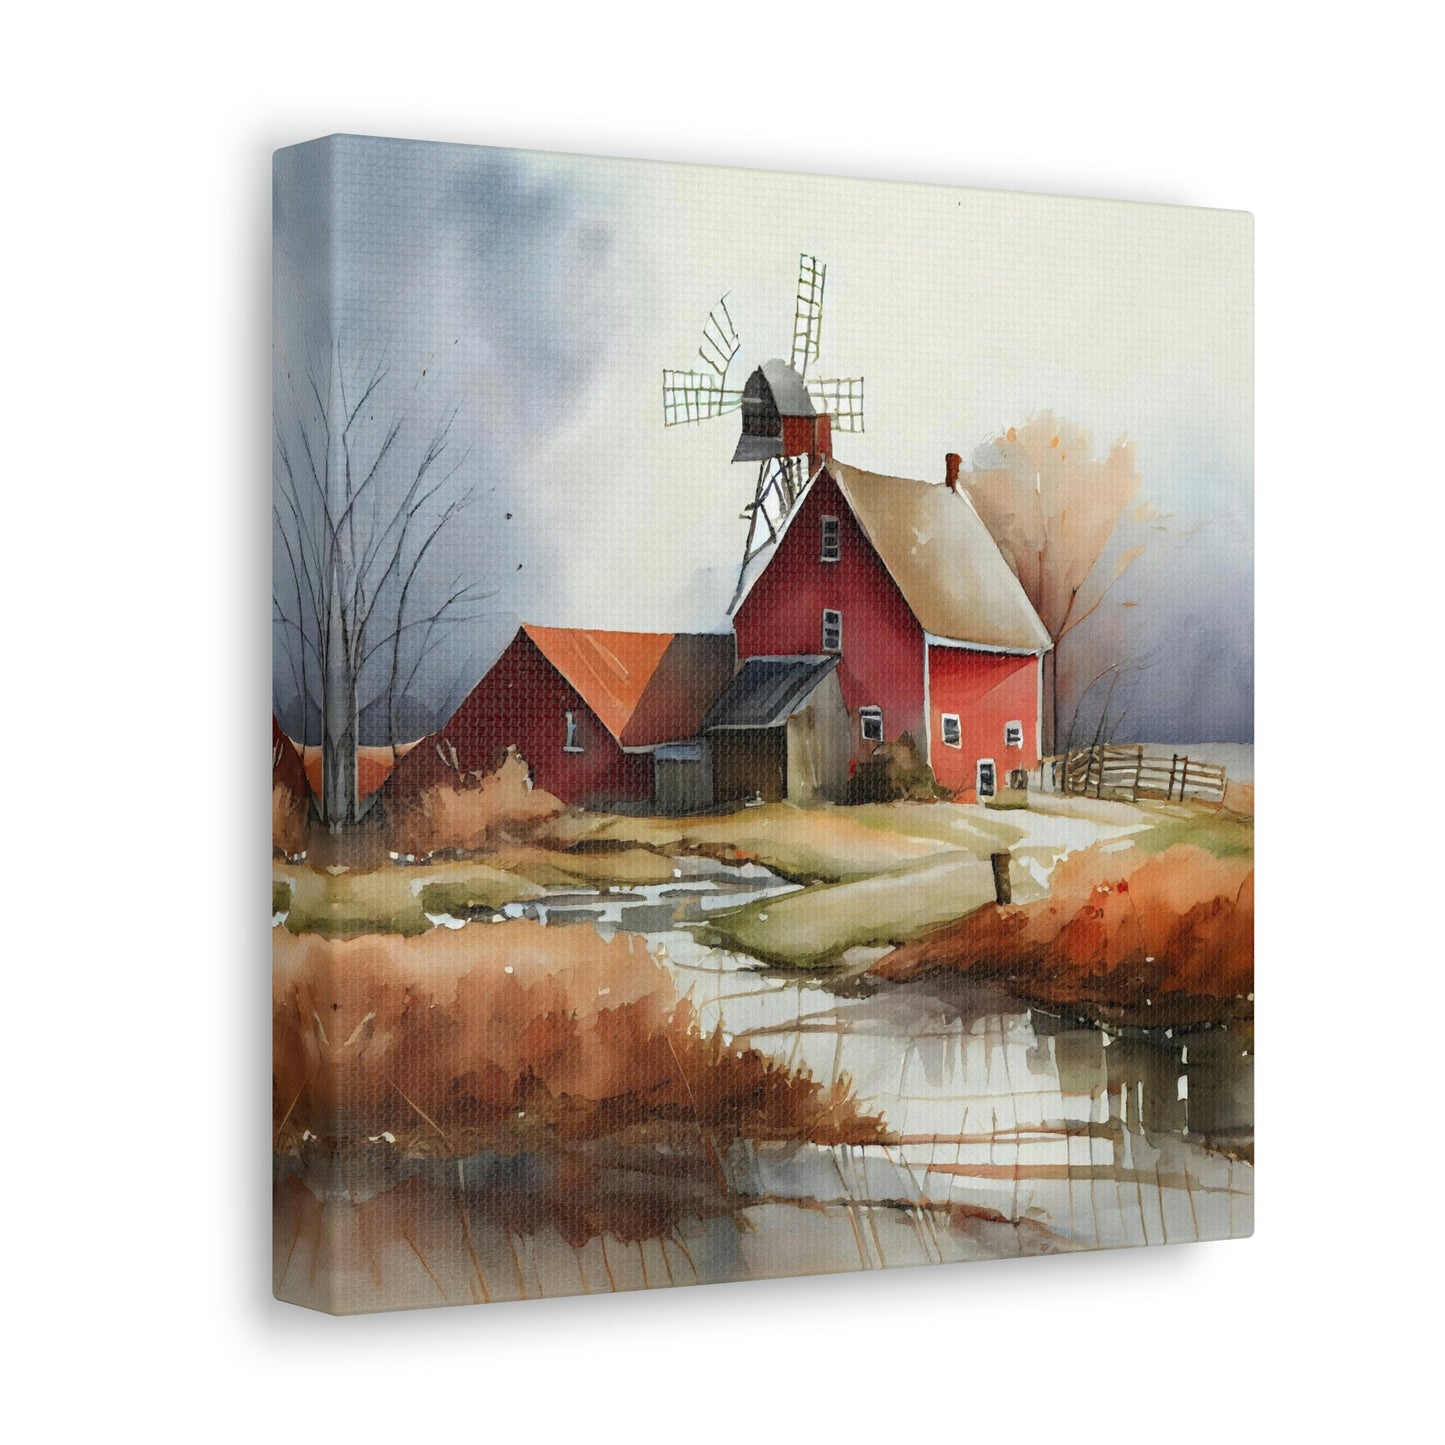 farmhouse home decor canvas art in a studio, red barn canvas artwork in a living room decorating a wall, farm theme canvas print displayed in barn decor home